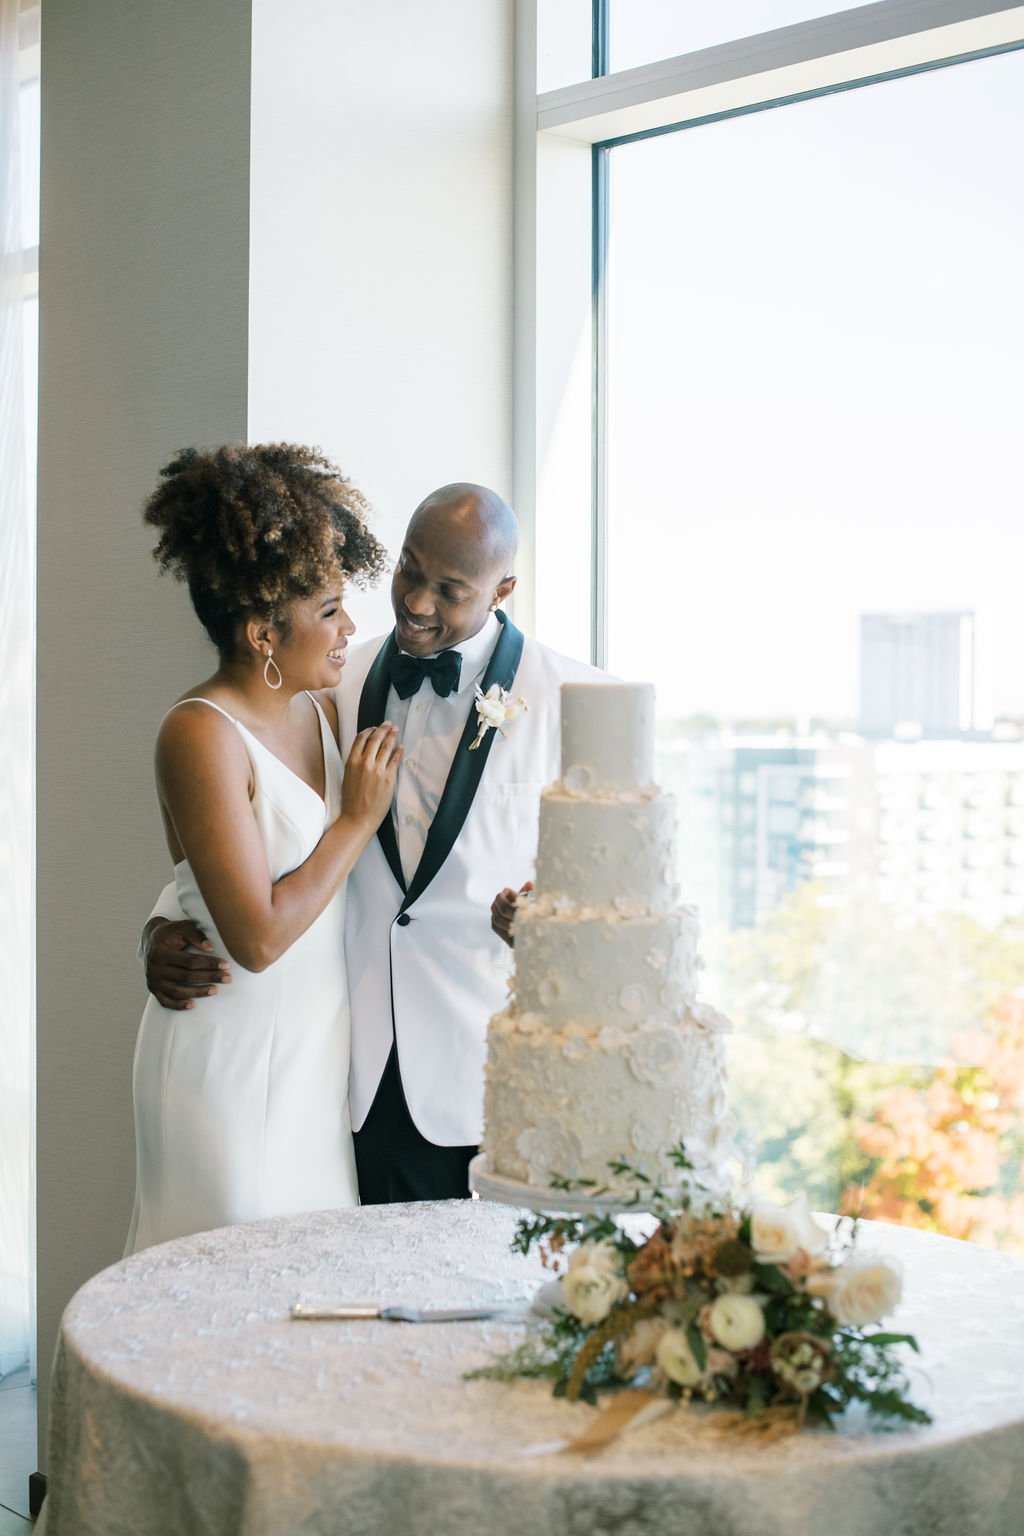 Bride Groom Wedding Cake The Willard Rooftop Lounge at AC Hotel Raleigh Downtown Fancy This Photography